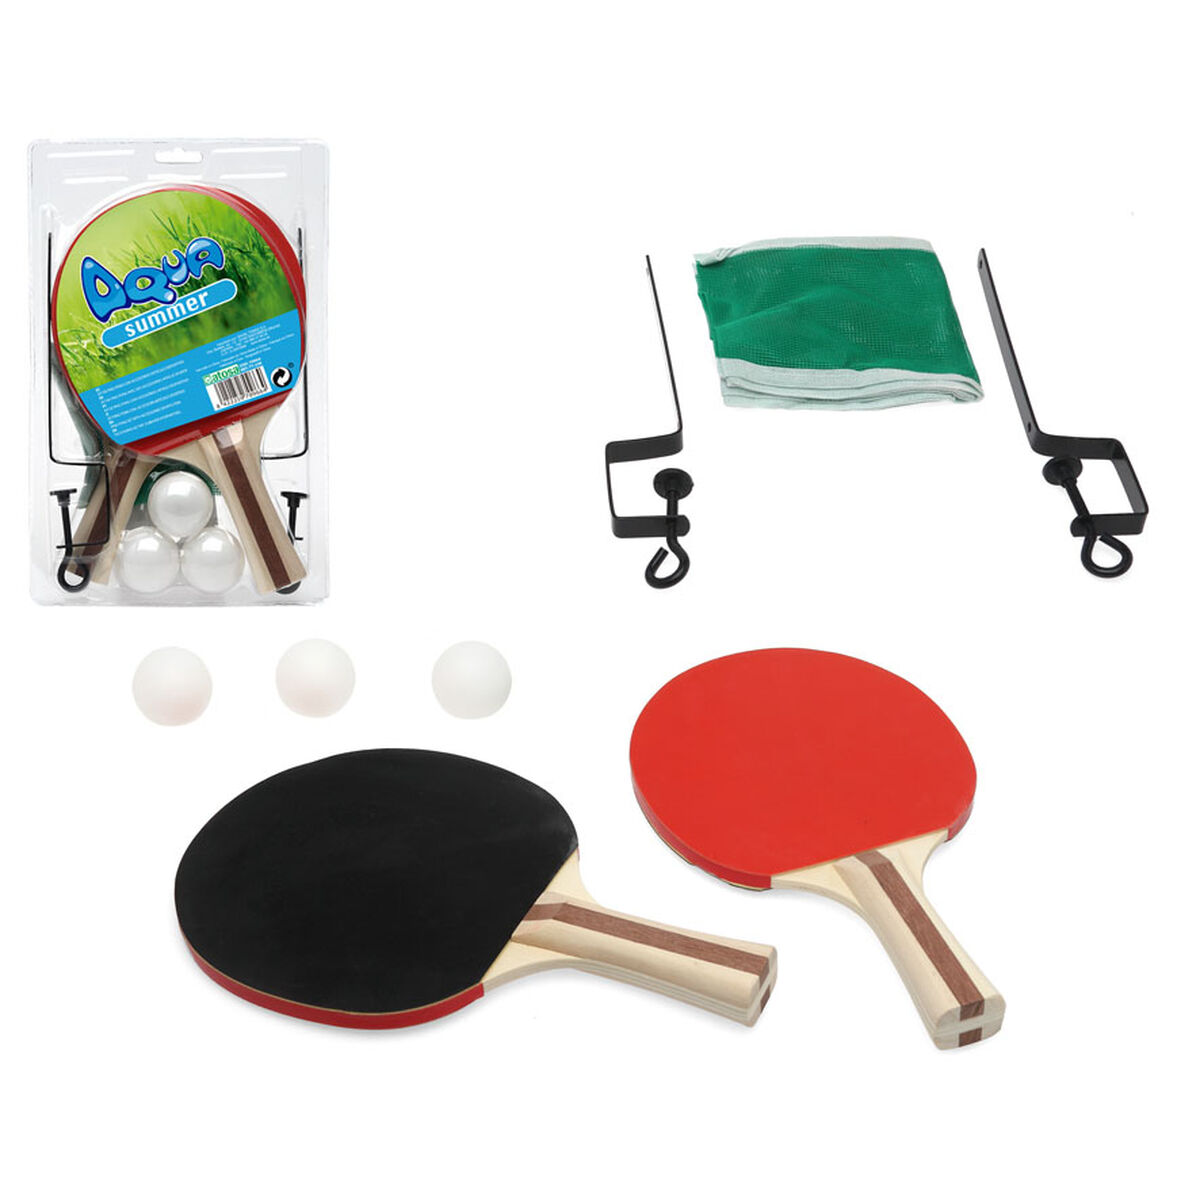 Ping Pong Set with Net